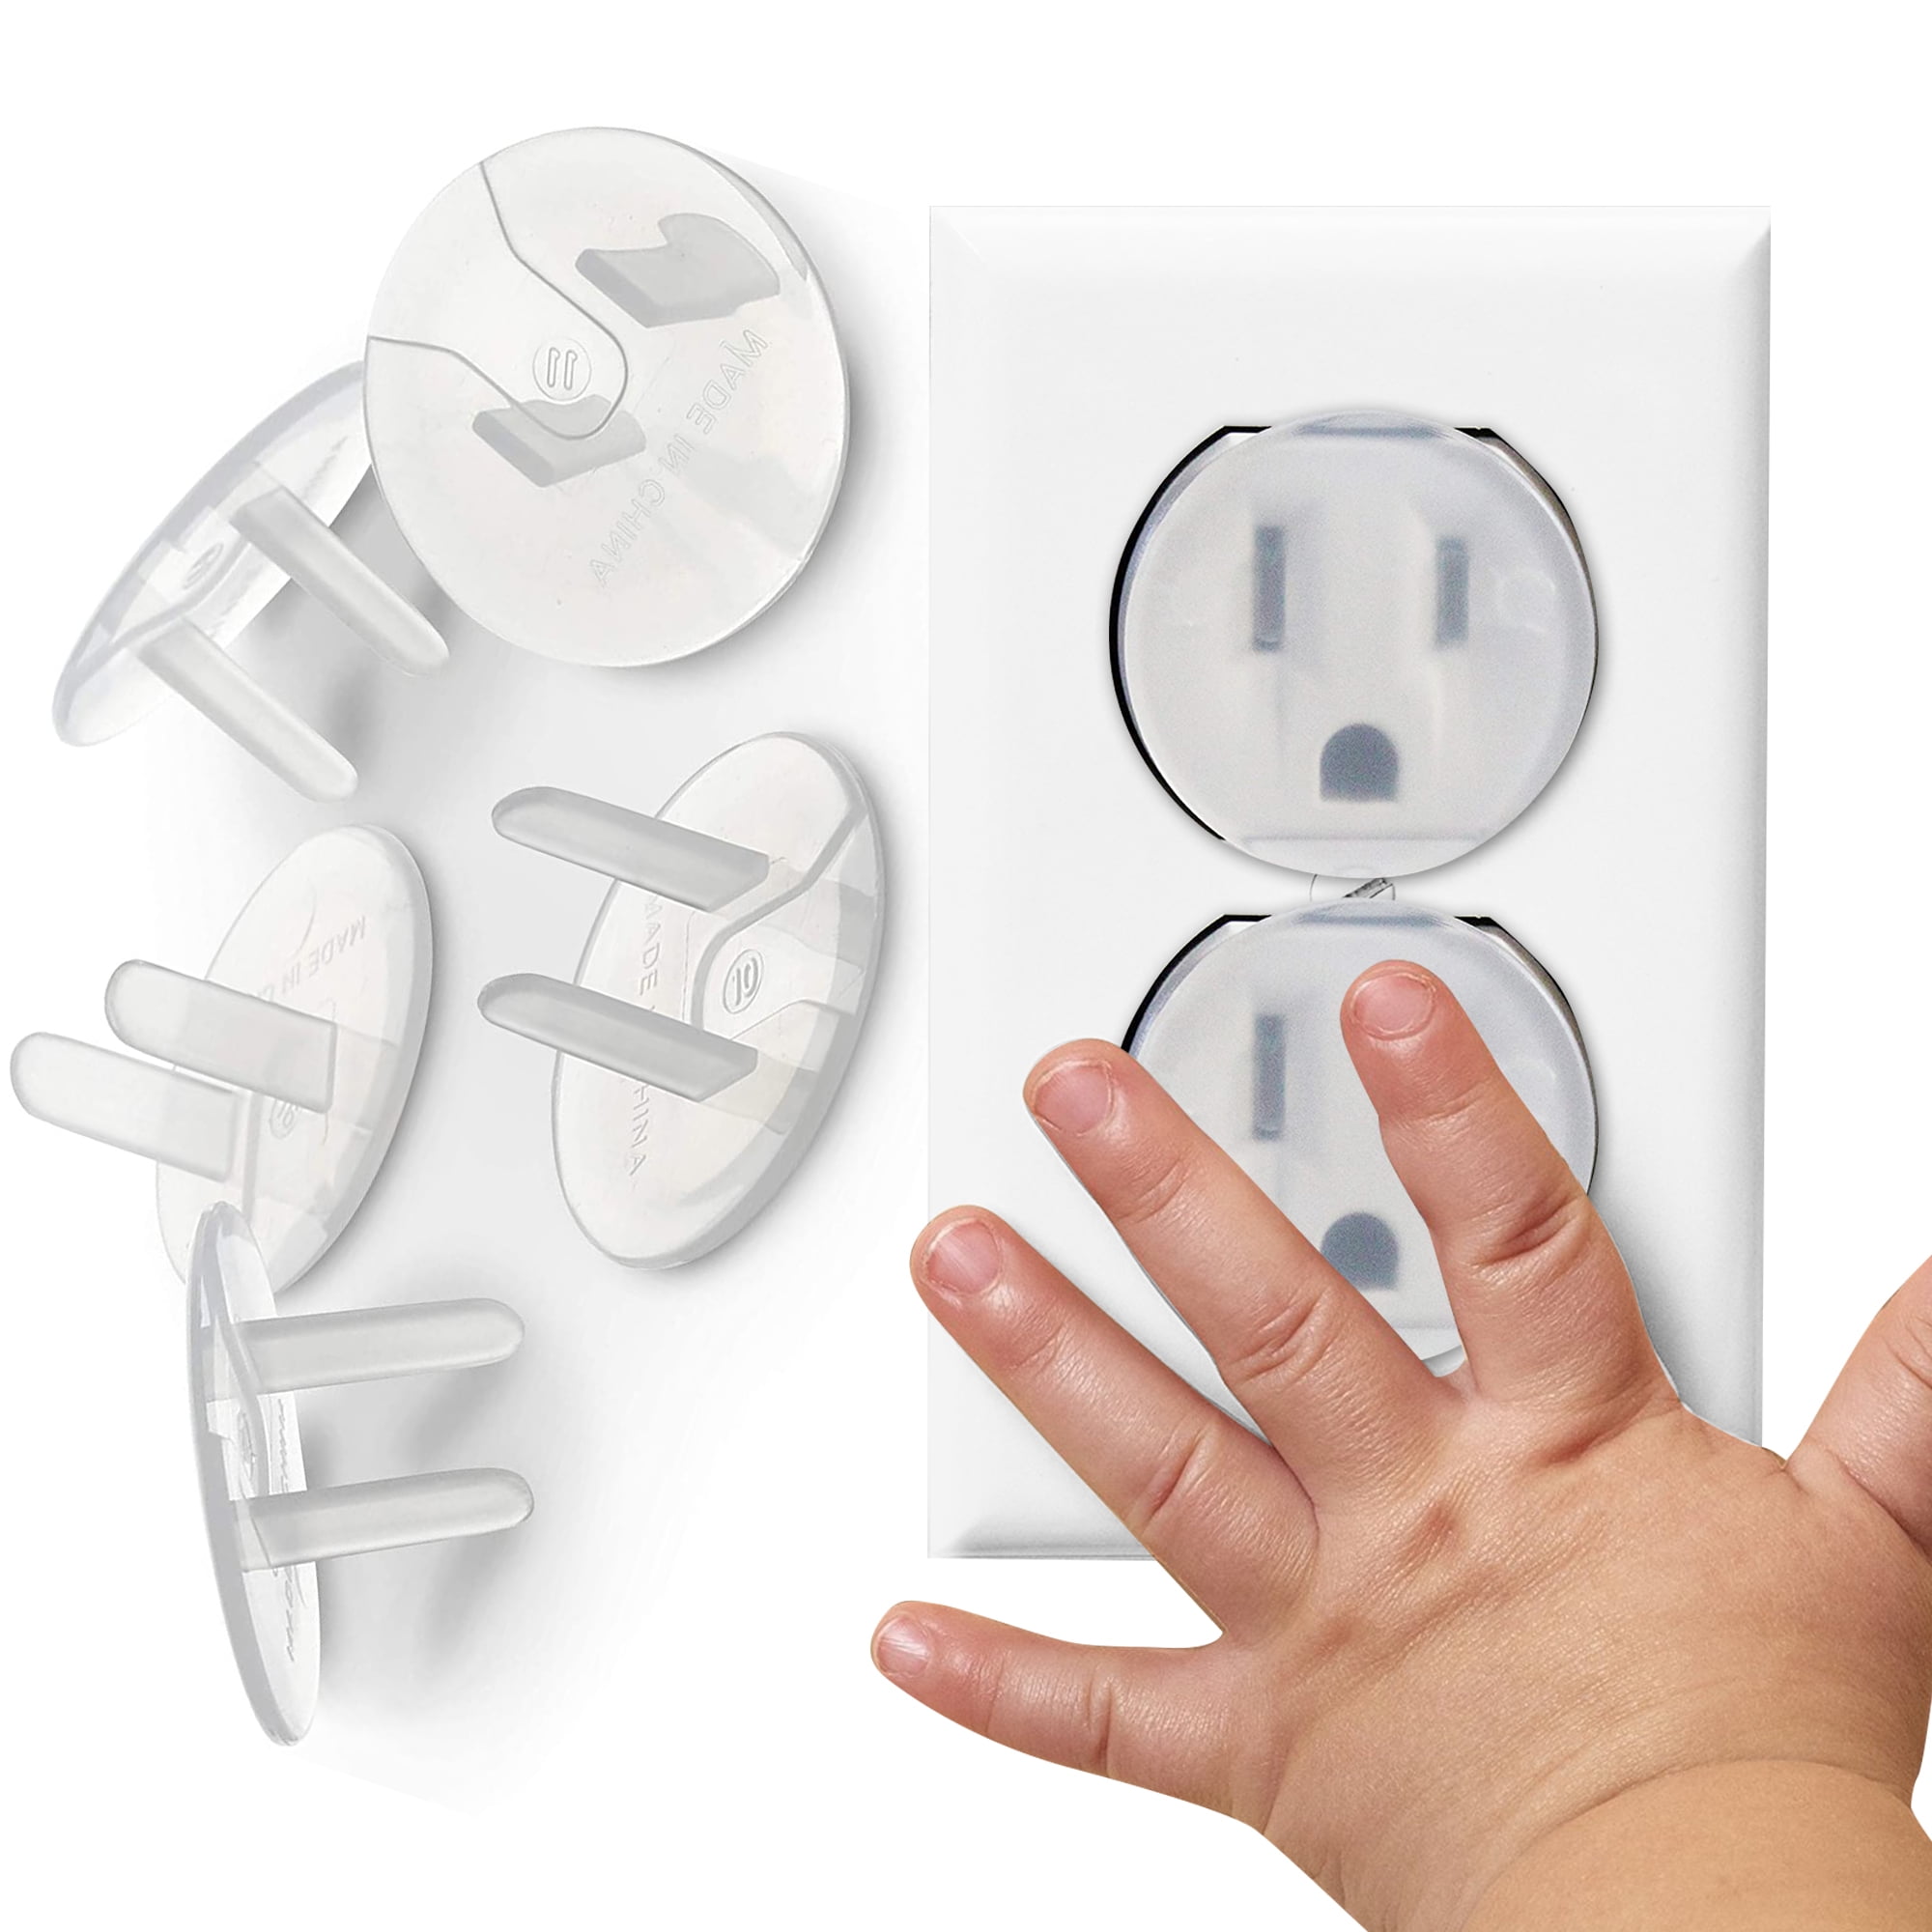 EUDEMON 1 Pack Baby Safety Electrical Outlet Cover Box Childproof Large Plug  Cover for Babyproofing Outlets Easy to Install & Use (Transparent) 